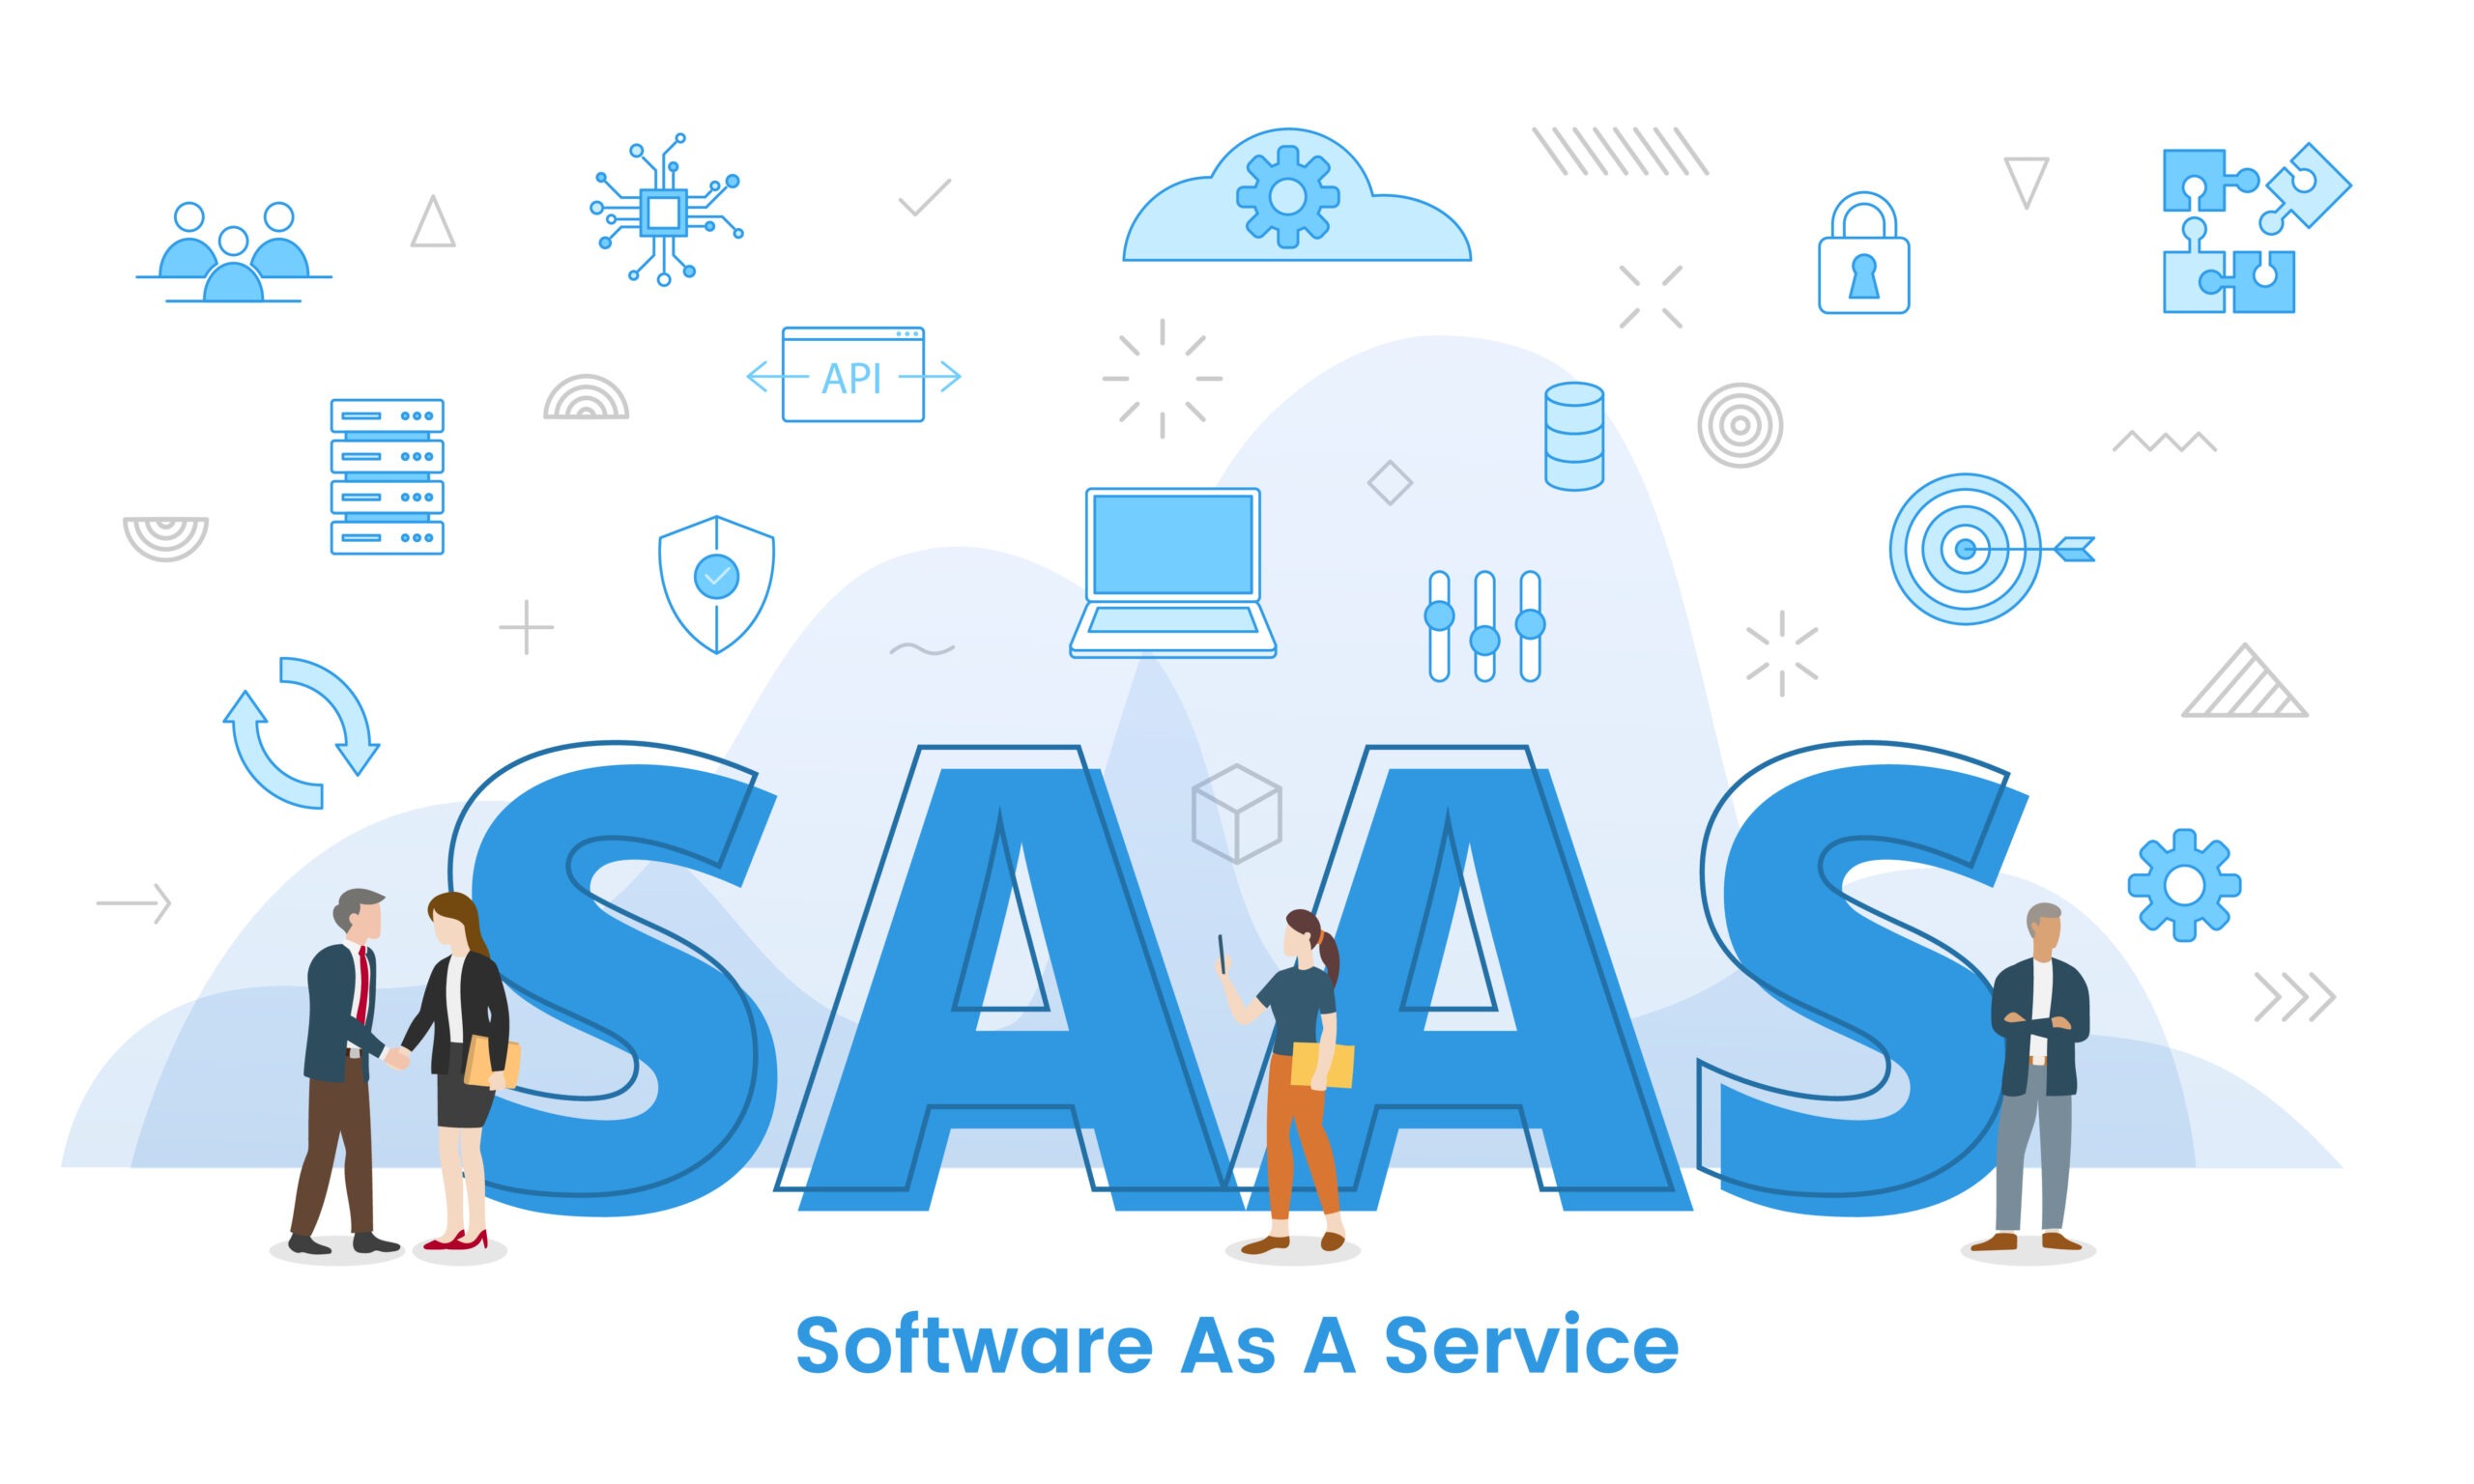 saas software as a service concept with big words and people sur